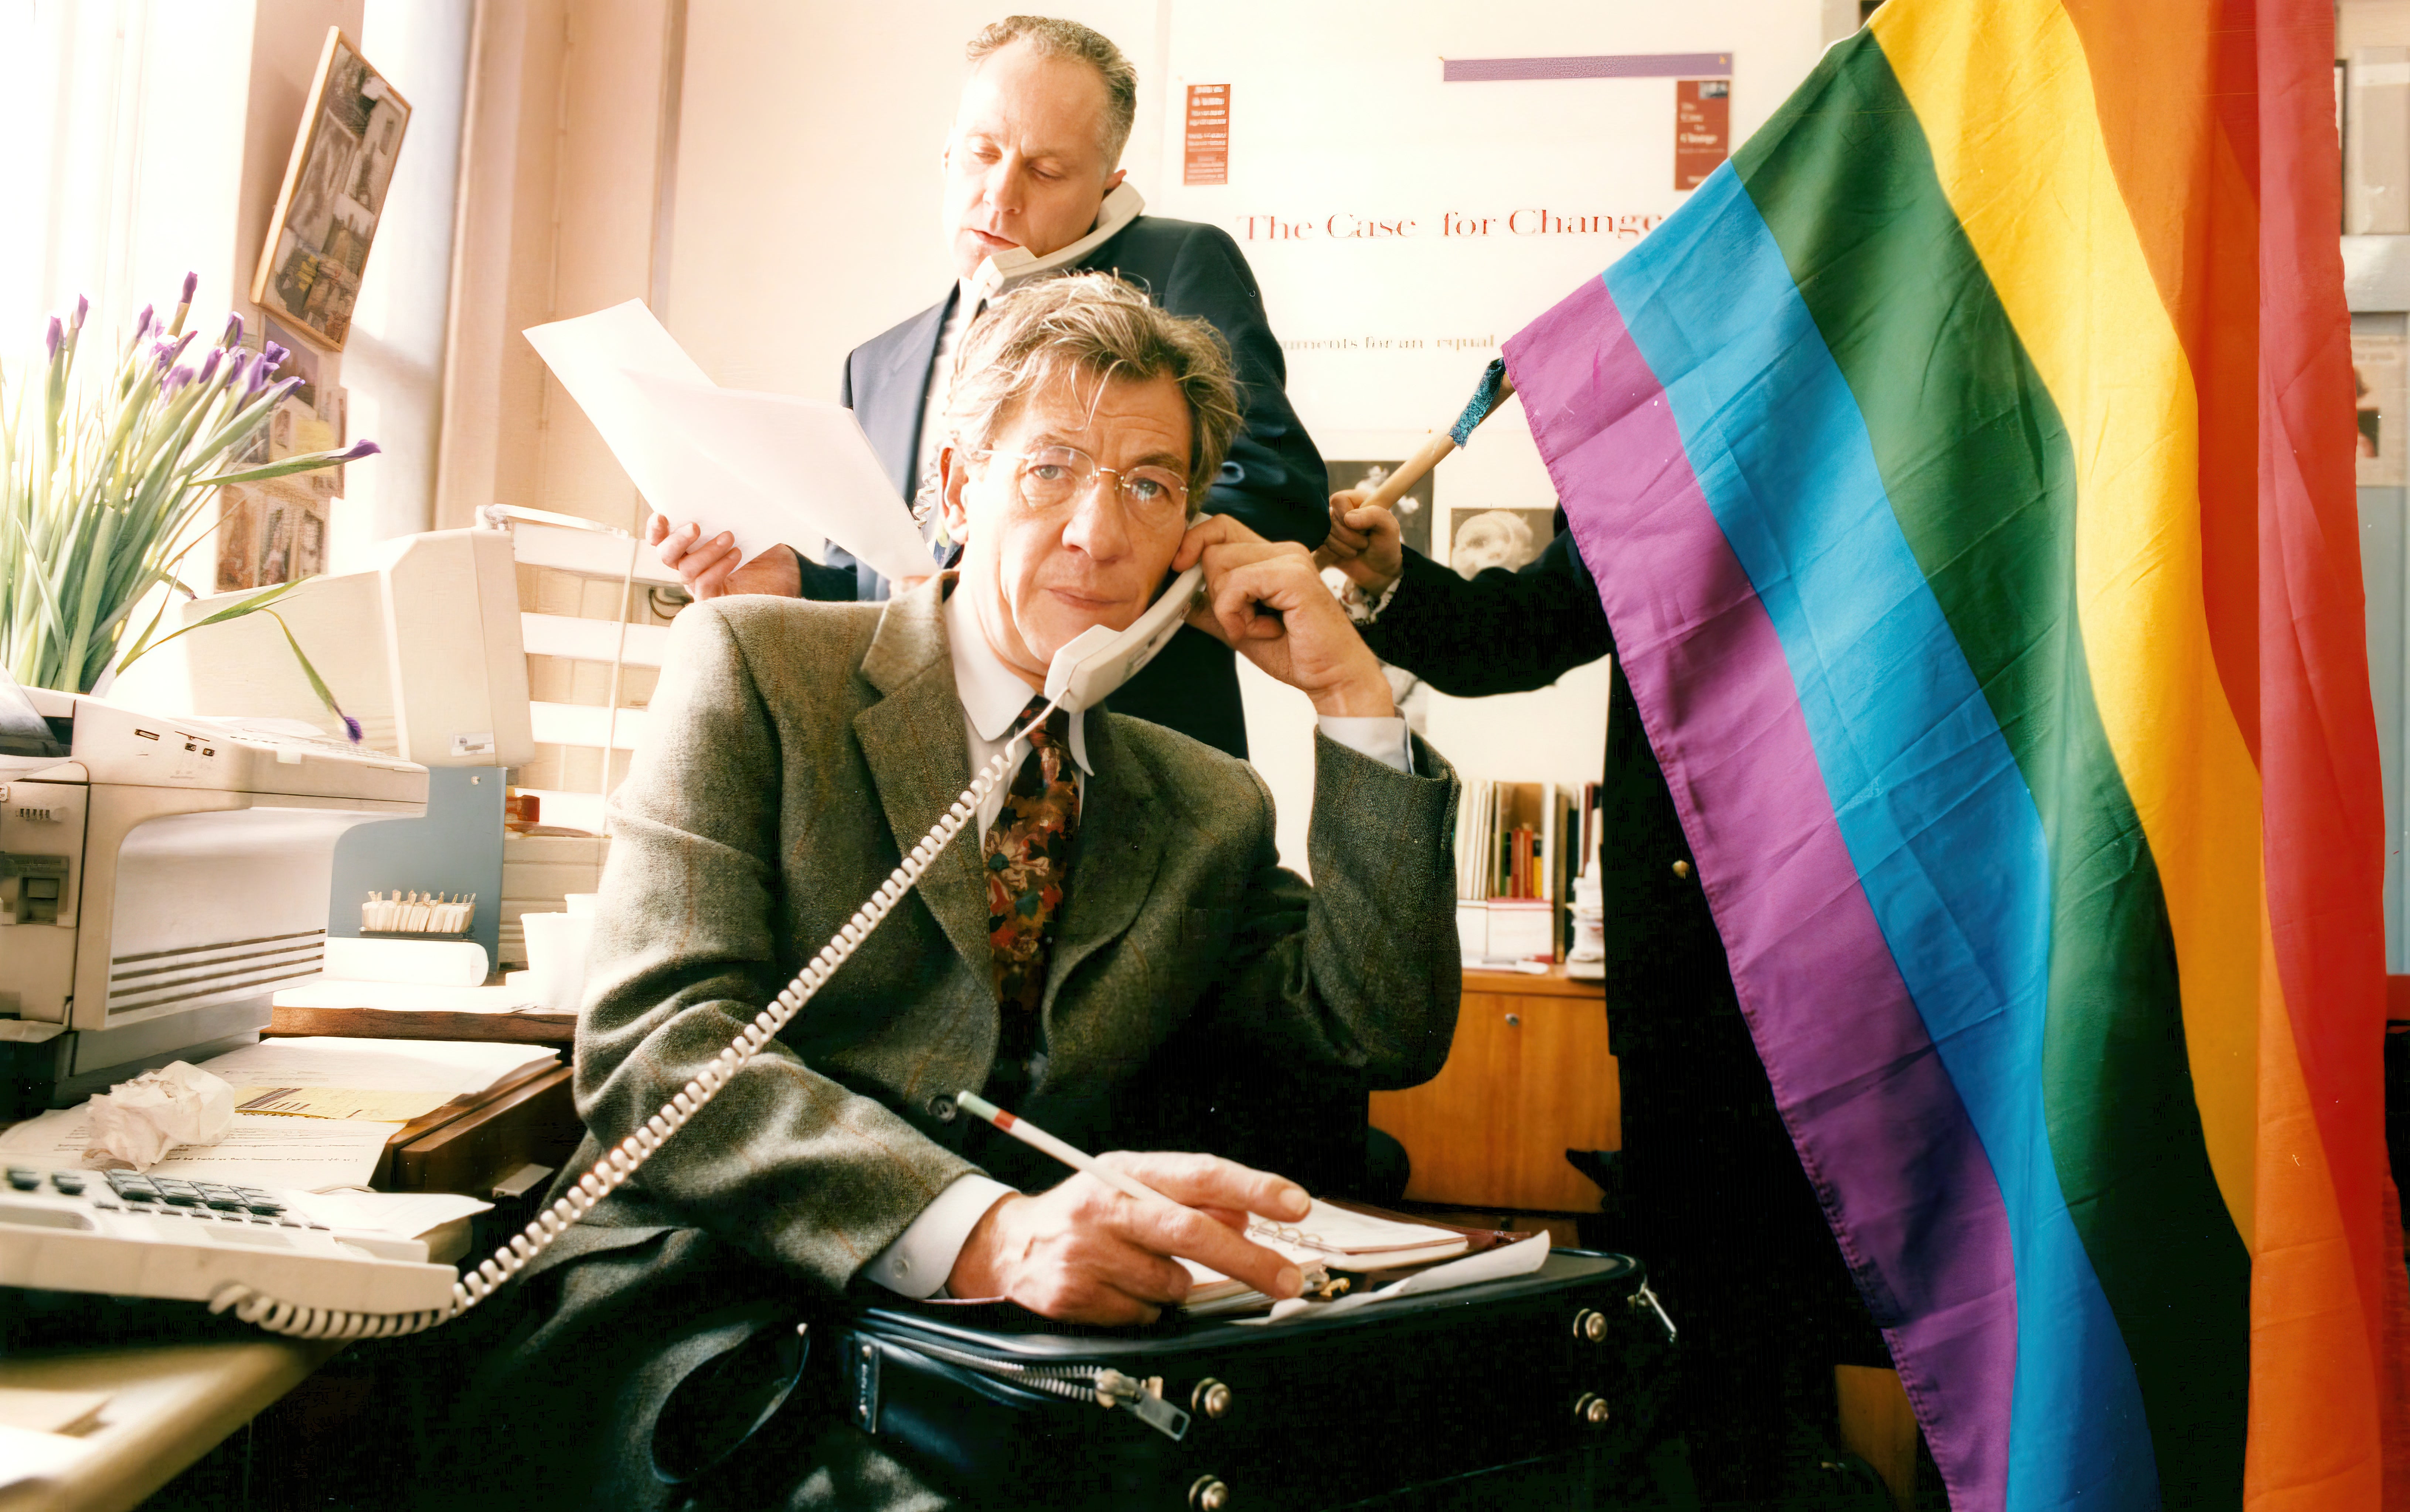 Sir Ian McKellen on the phone at Stonewall offices before the government’s age of consent reform in 1994.